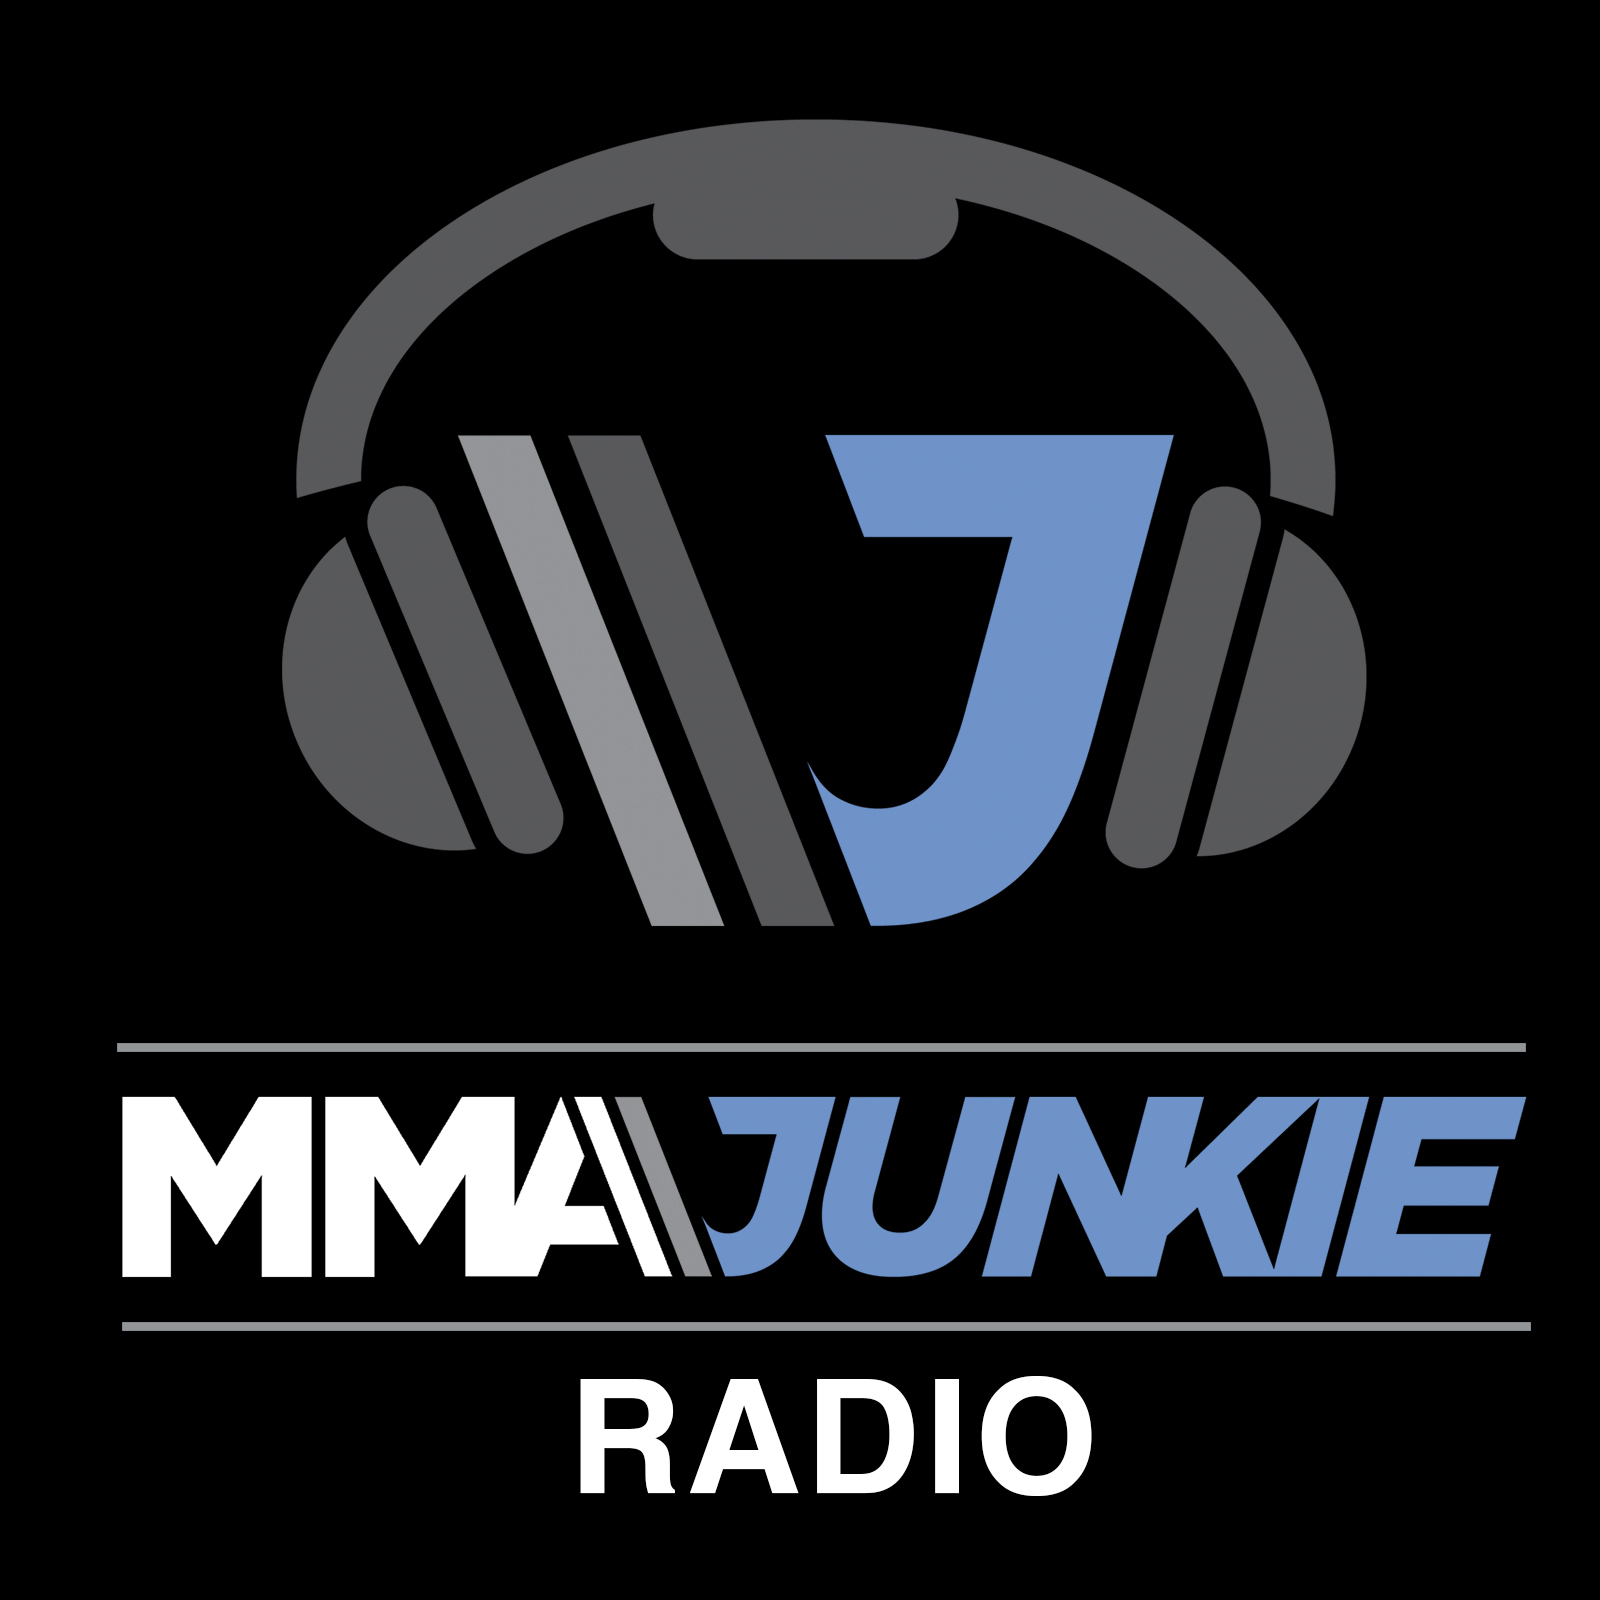 Ep. #3352: Jake Paul Vs Nate Diaz, Aaron Pico joins the show, more